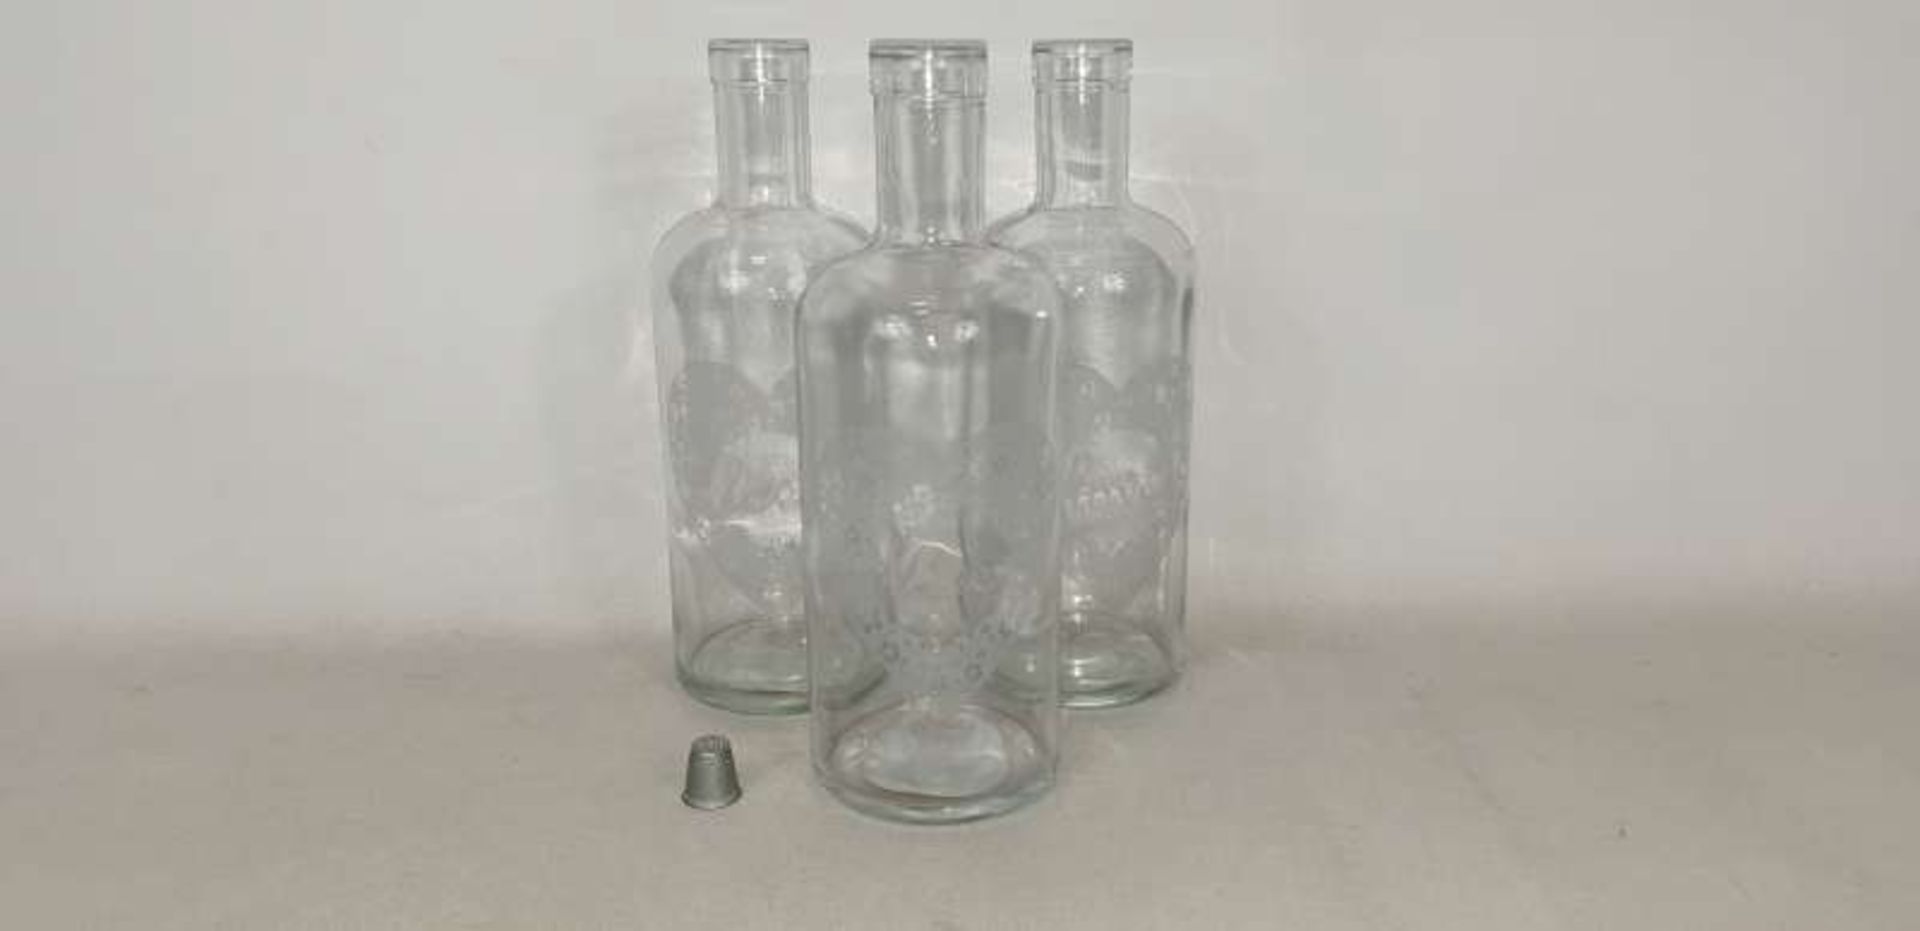 120 X GLASS BOTTLE VASES WITH LOVE HEART DETAIL IN 20 BOXES